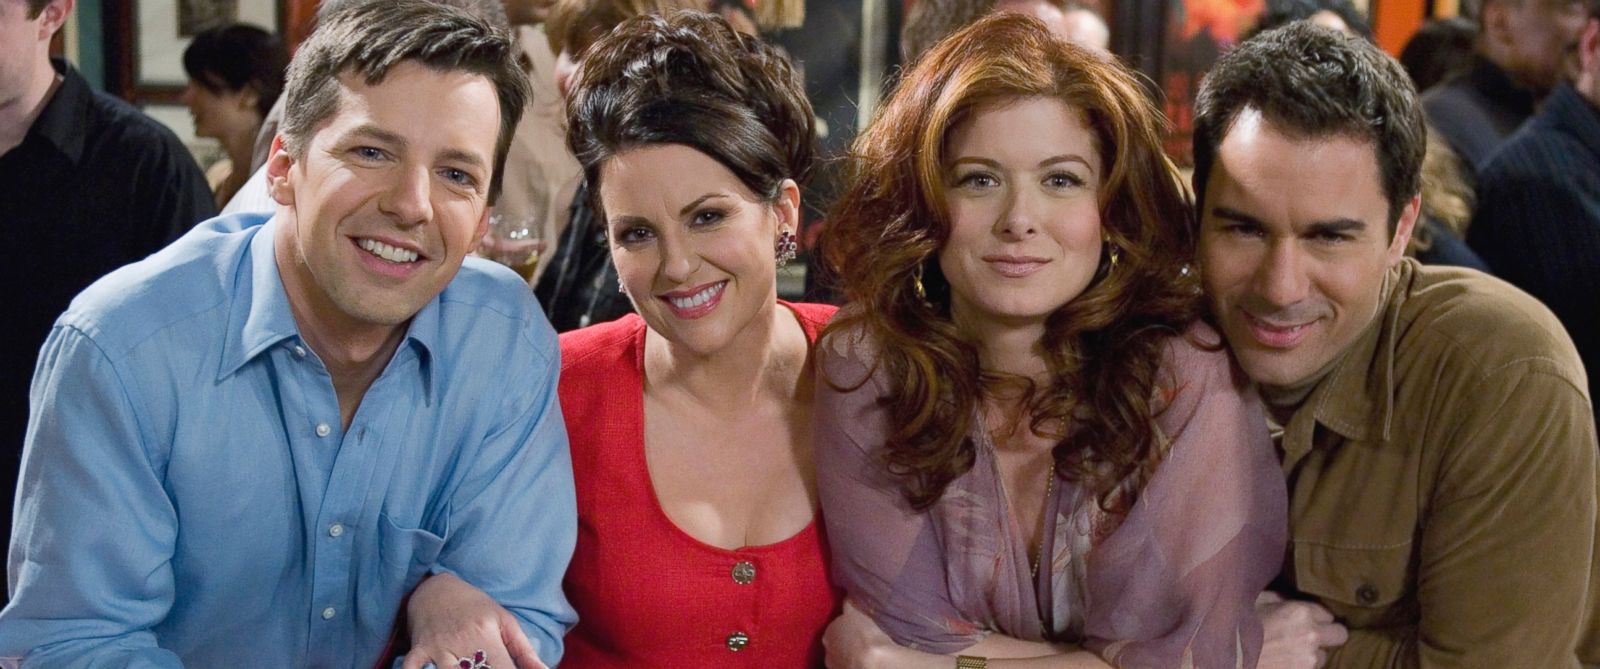 will and grace season 1 ep 1